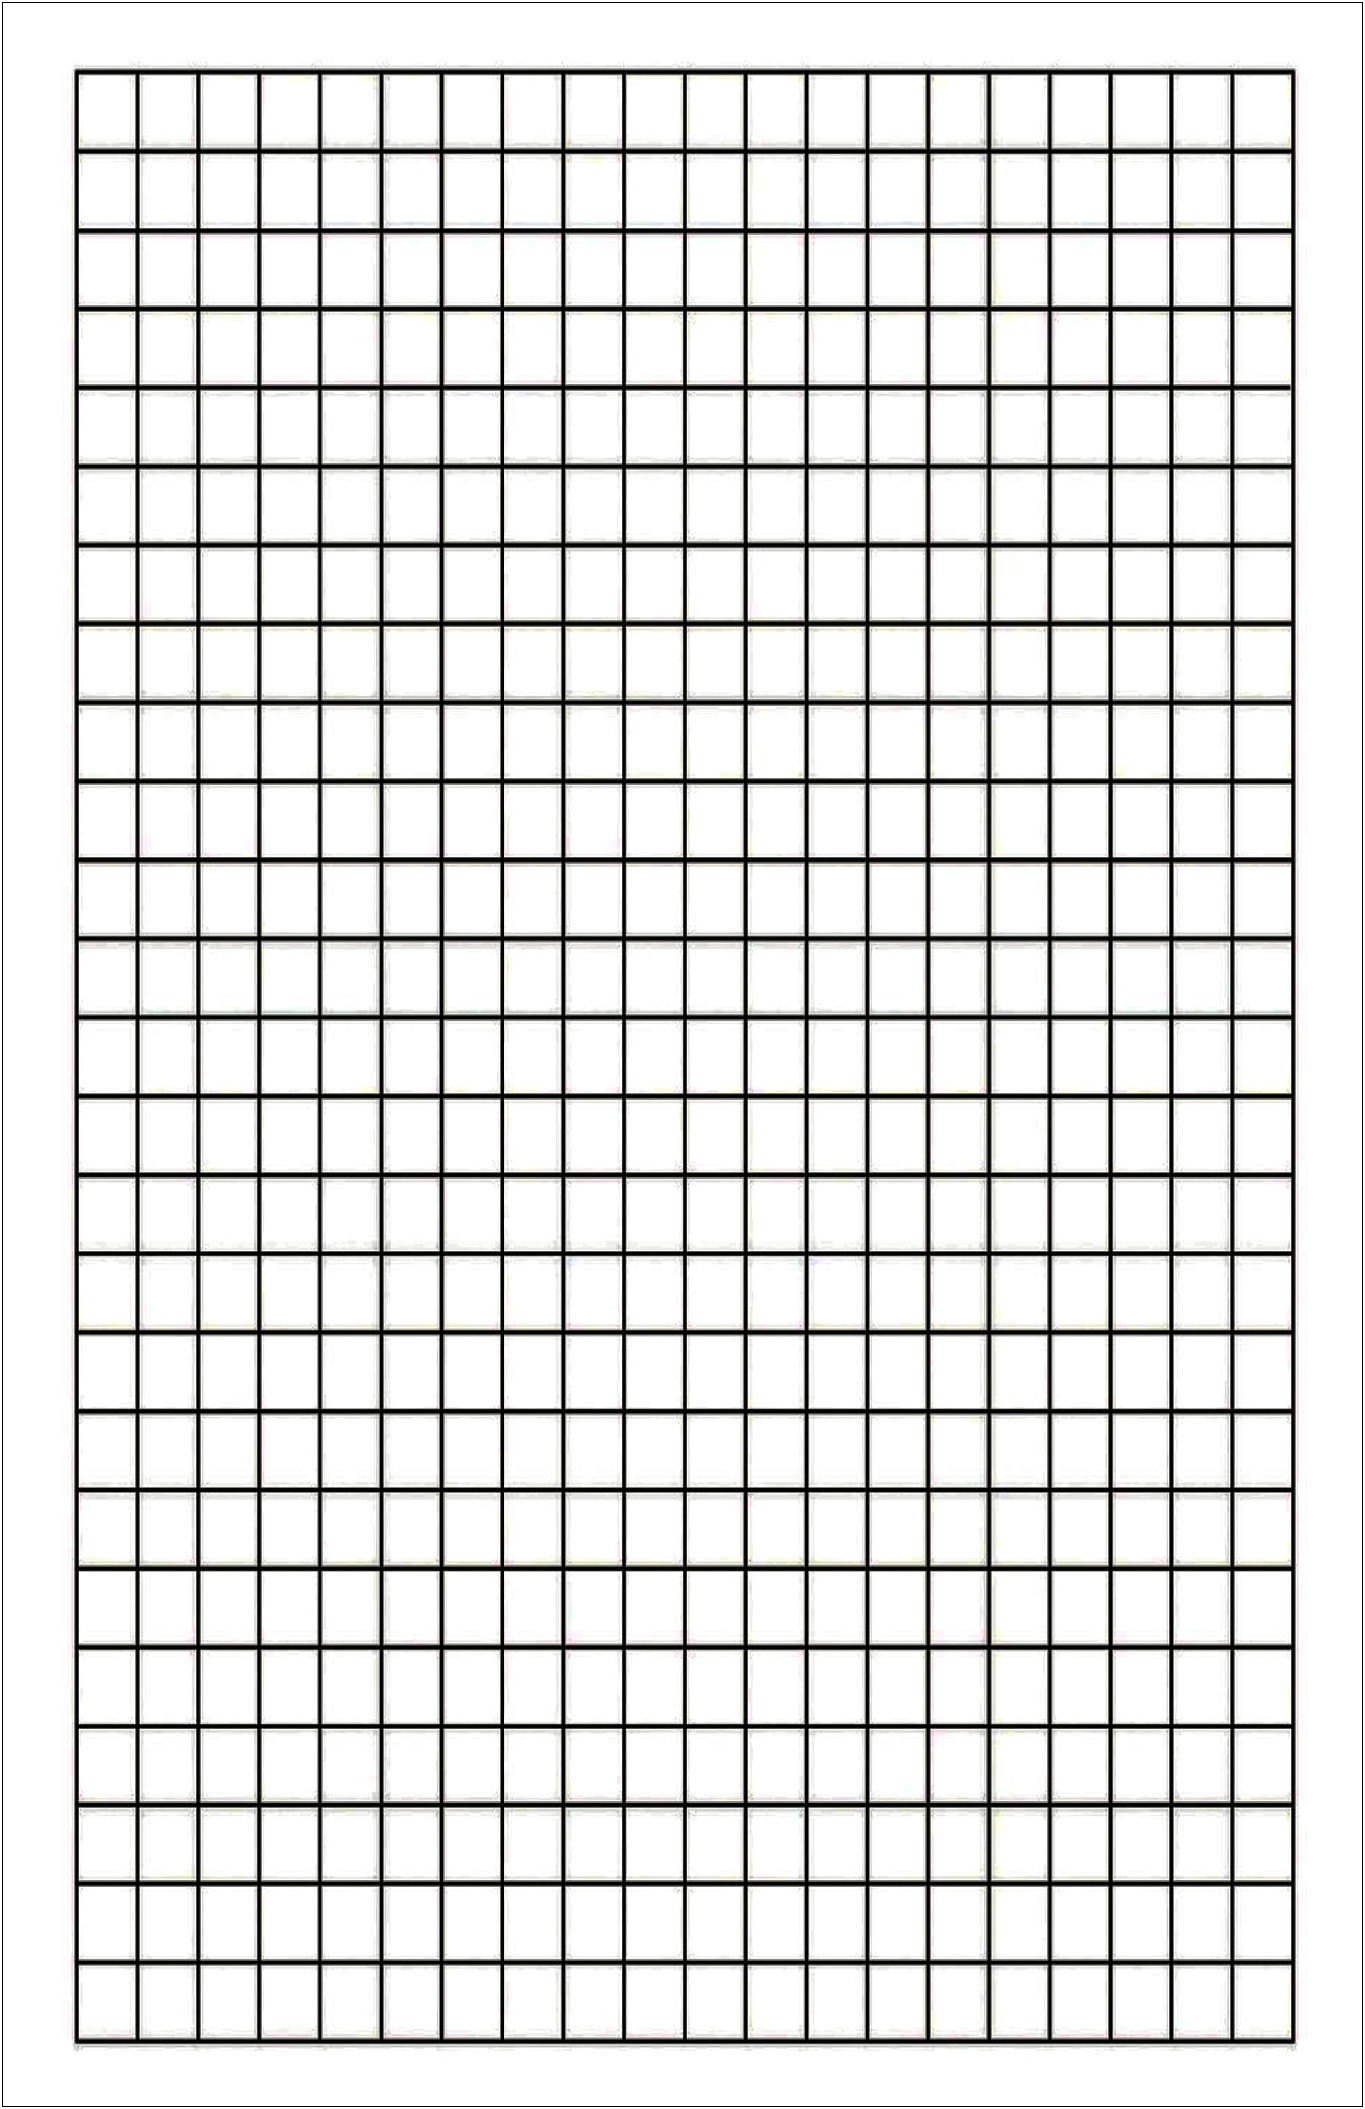 Free Template For Graphing Paper With Axis